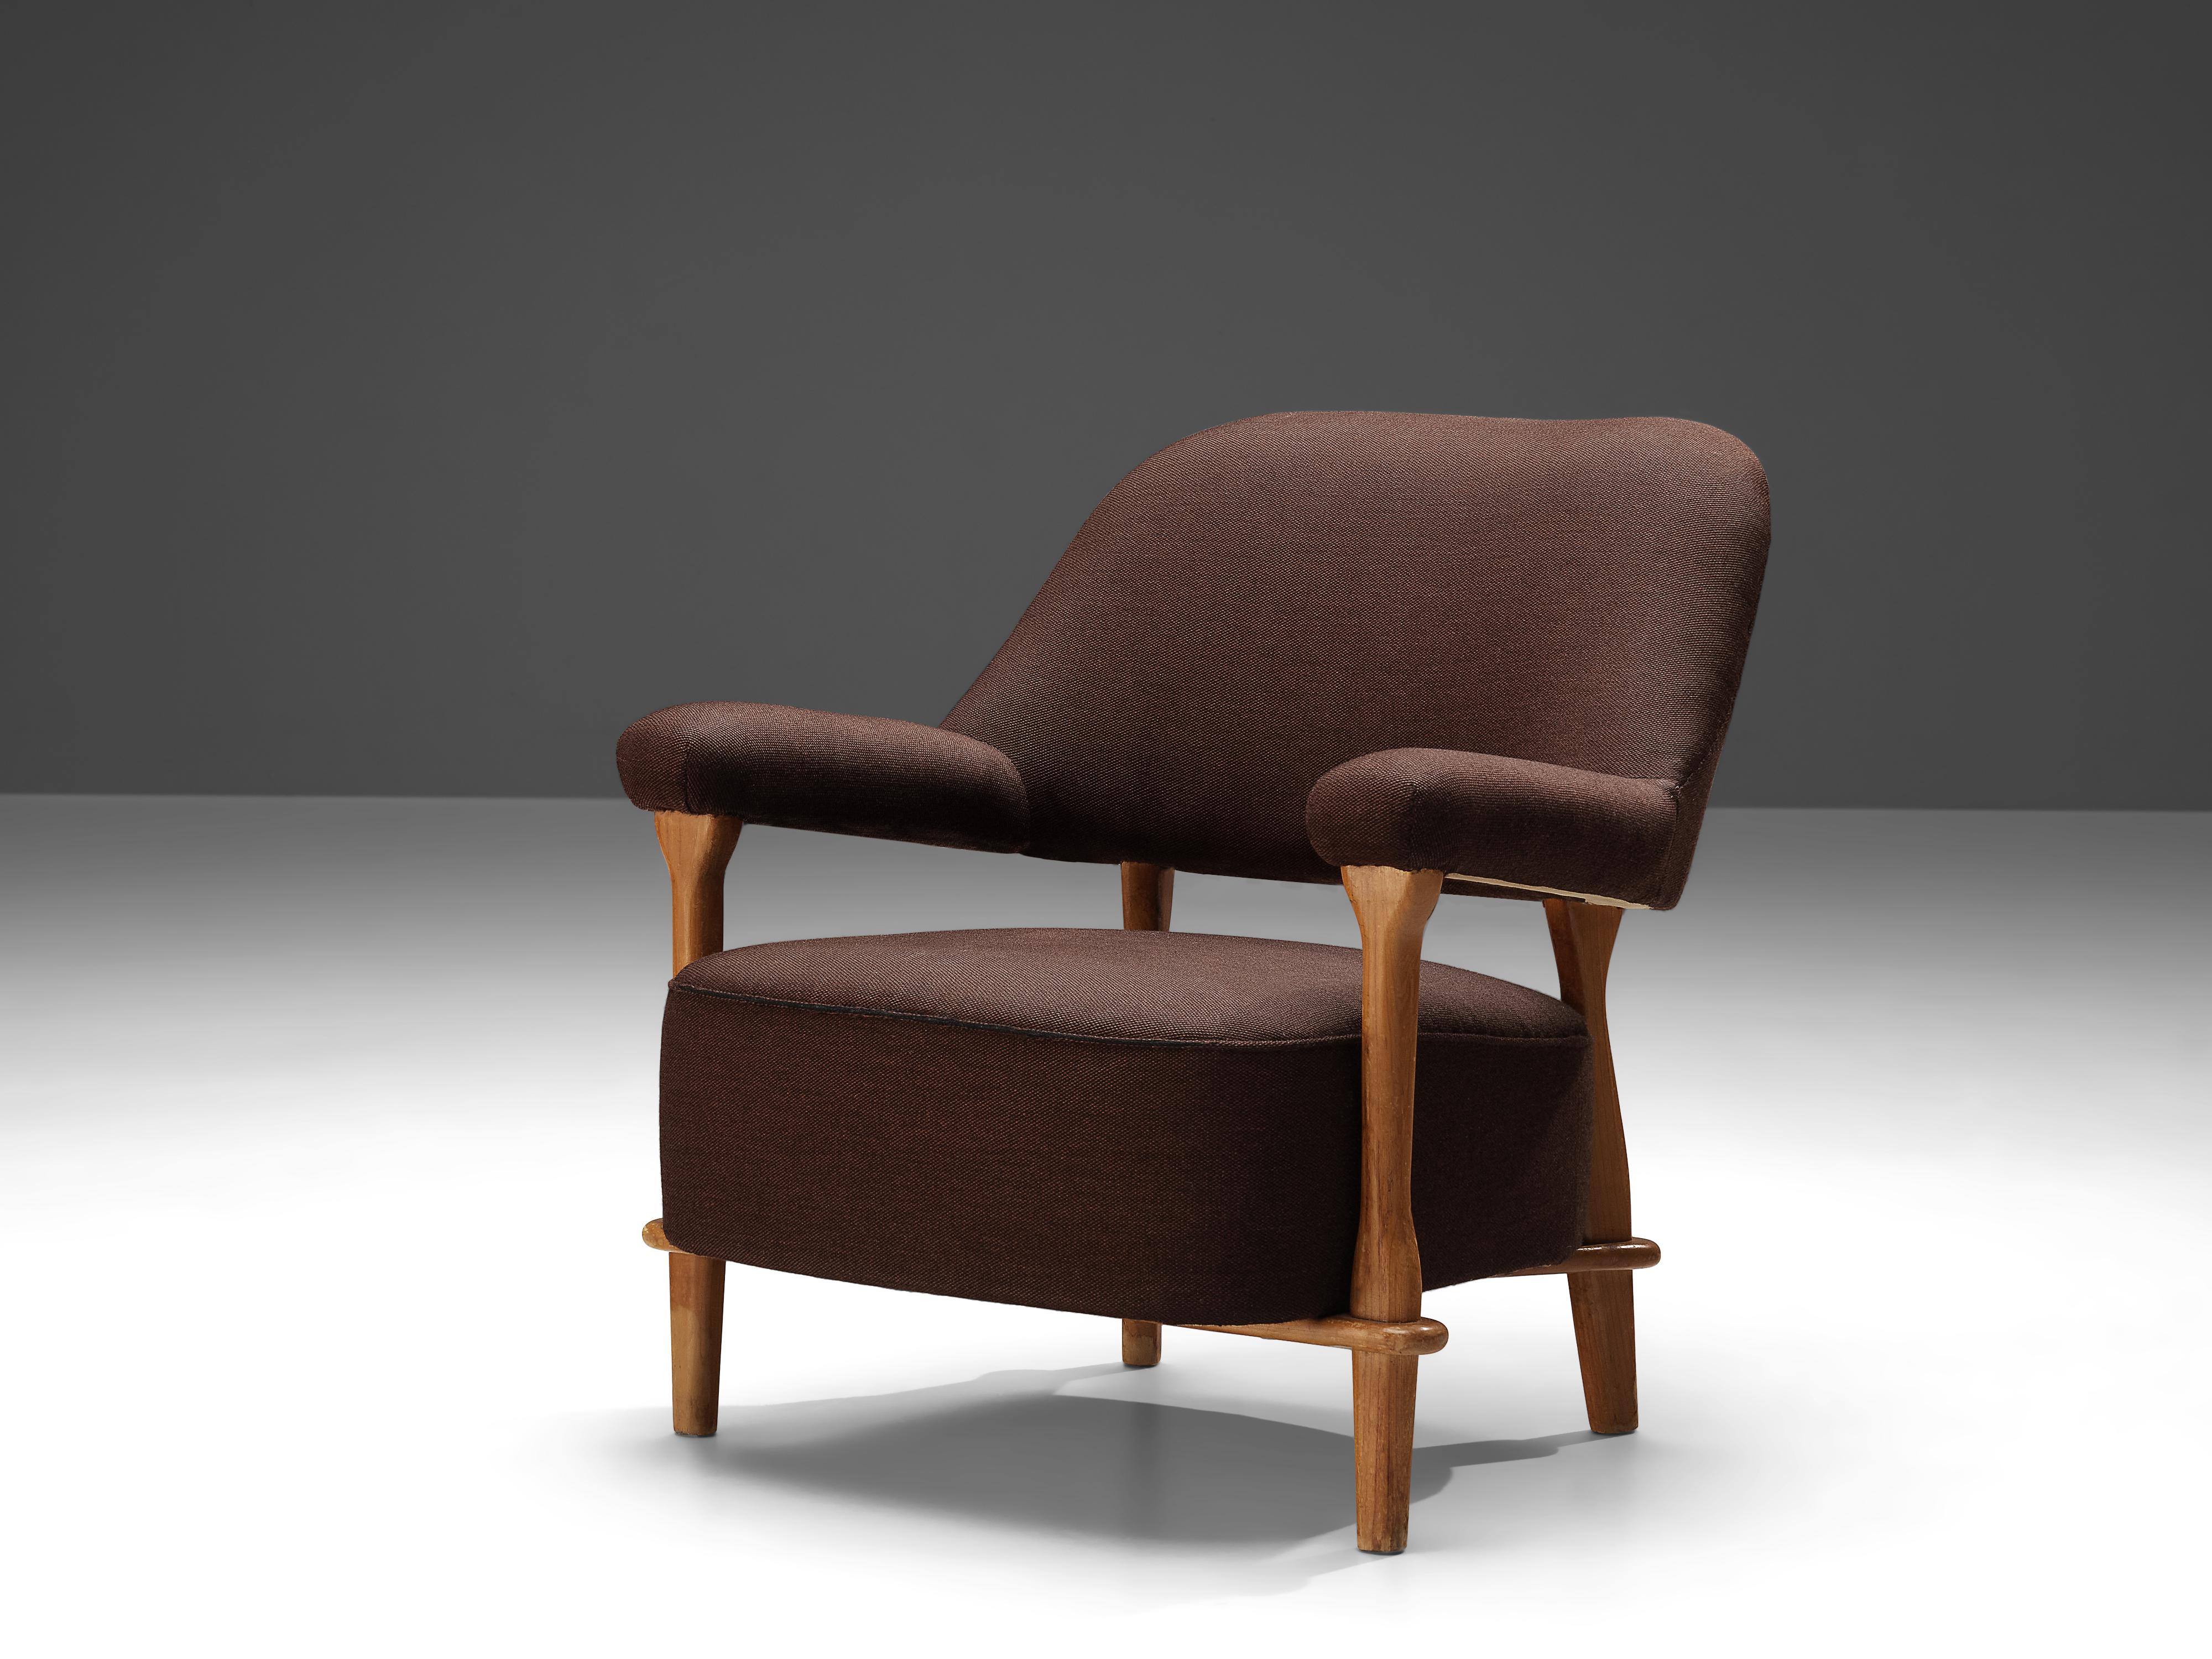 Theo Ruth for Artifort, lounge chair model 109, oak, brown fabric, the Netherlands, 1950s

The lounge chair model 109 was designed by Theo Ruth for Artifort in the 1950s. With an eye to the form and comfort, Ruth created an armchair that is